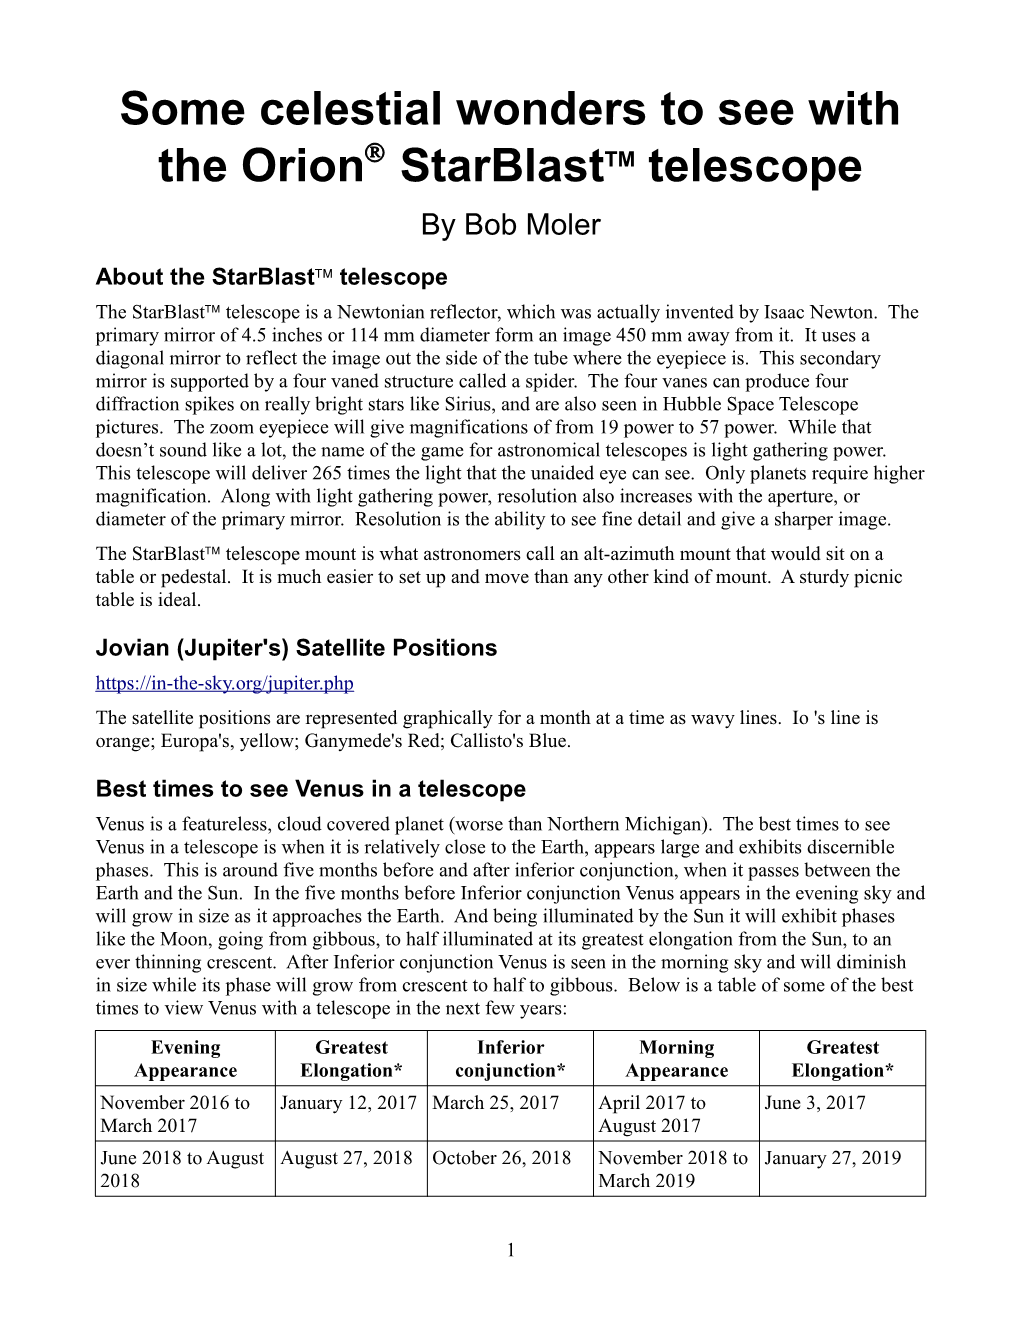 Some Celestial Wonders to See with the Orion Starblasttm Telescope